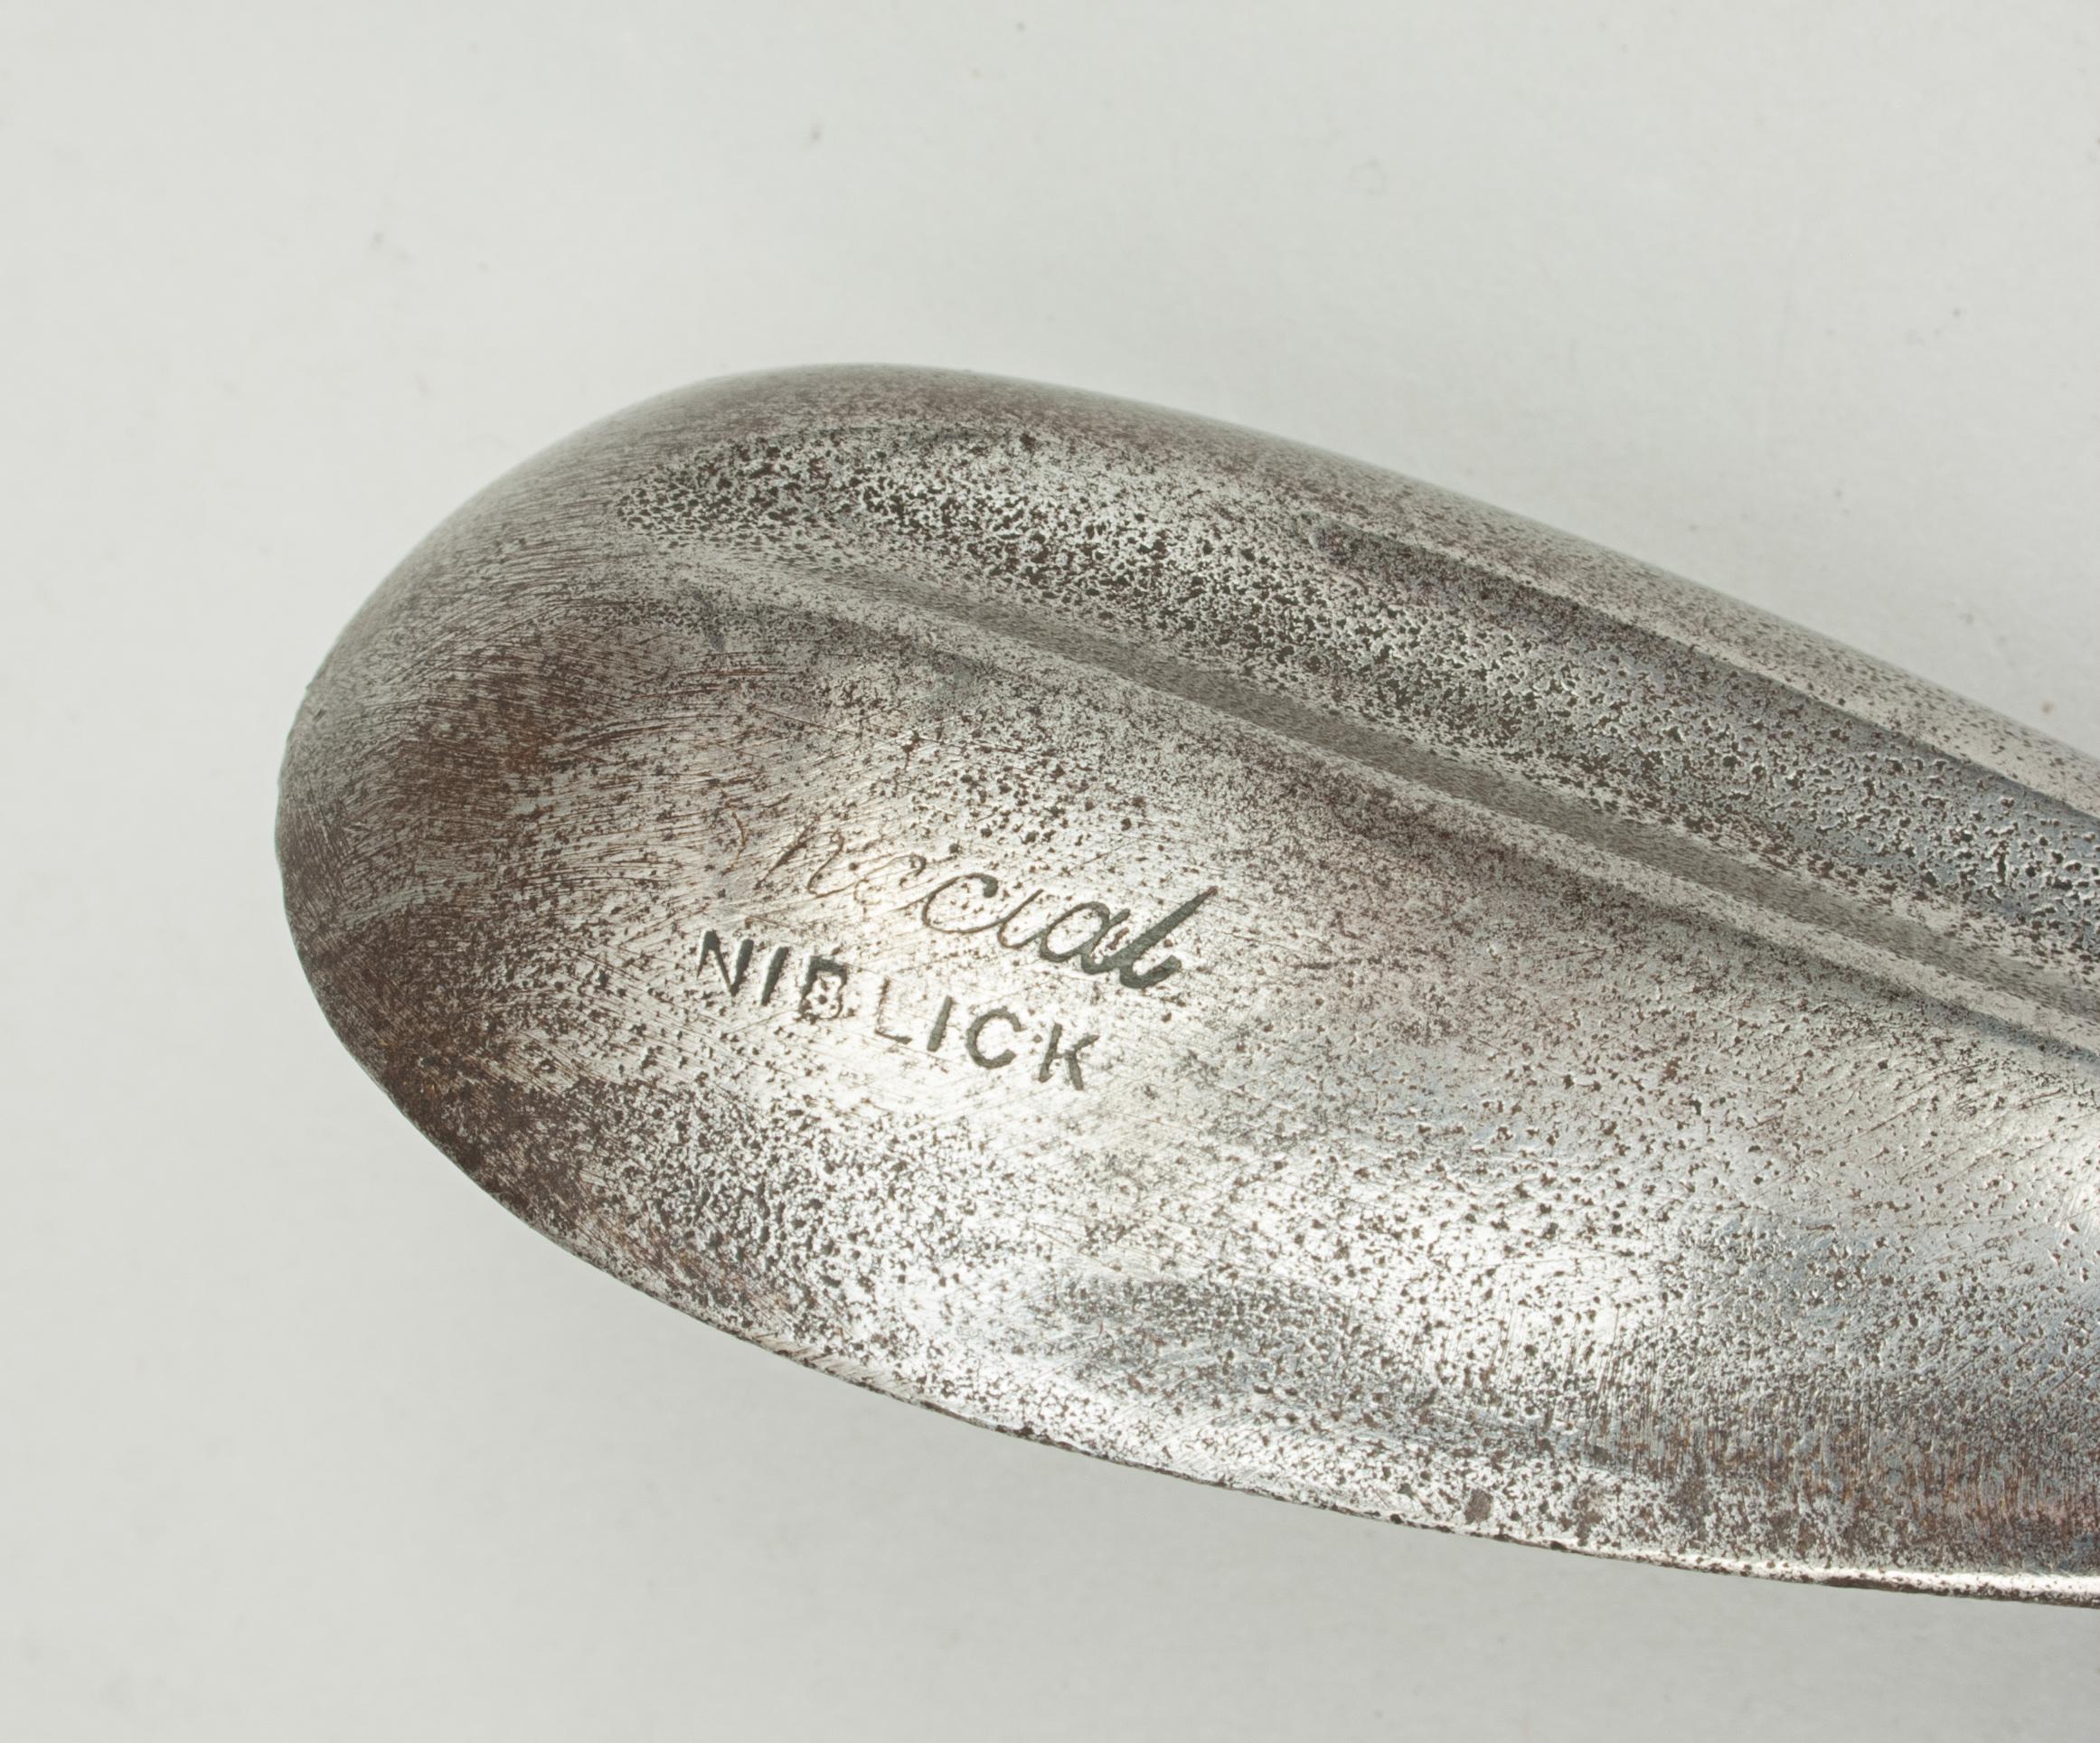 Early 20th Century Hickory Shafted Niblick, Golf Club